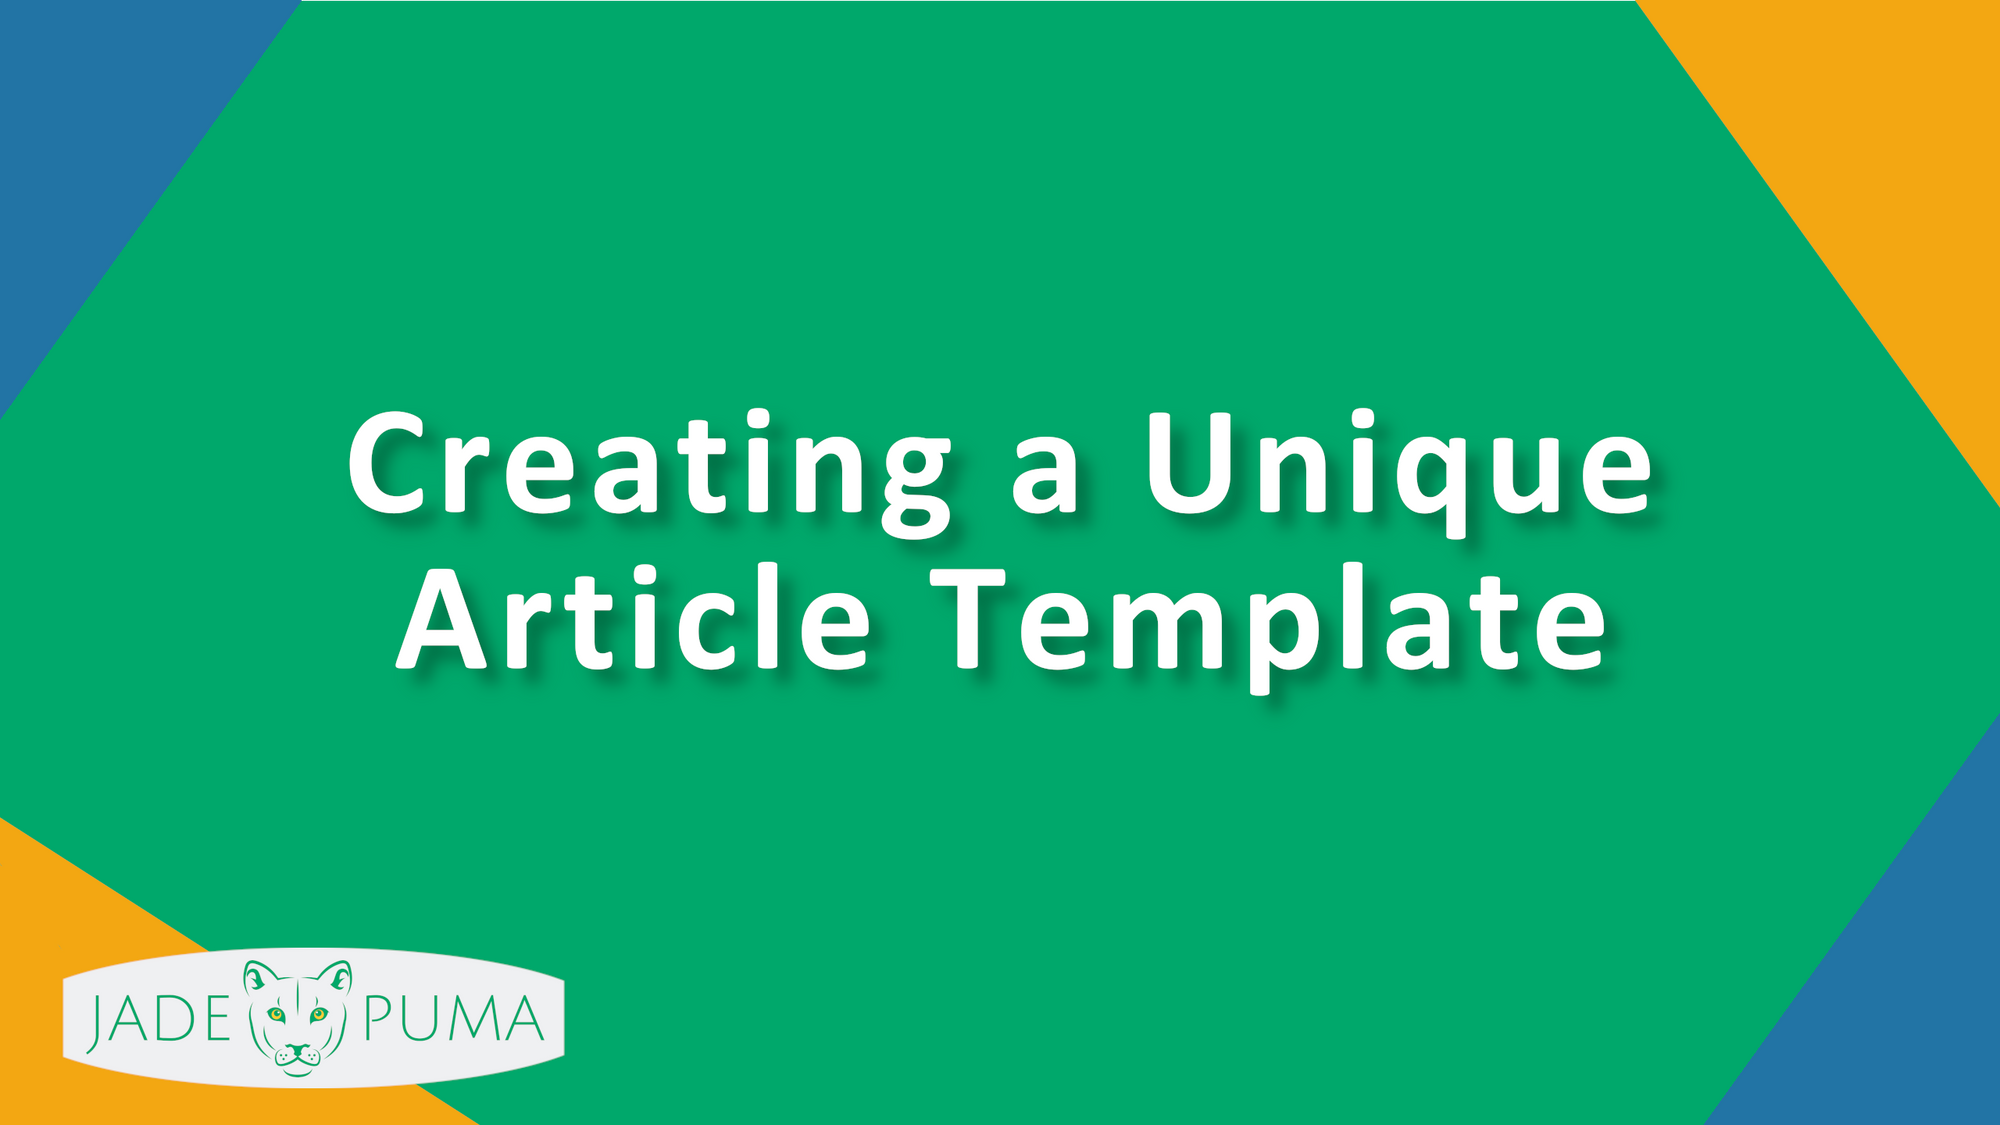 Creating a Unique Article Template for your Shopify Store